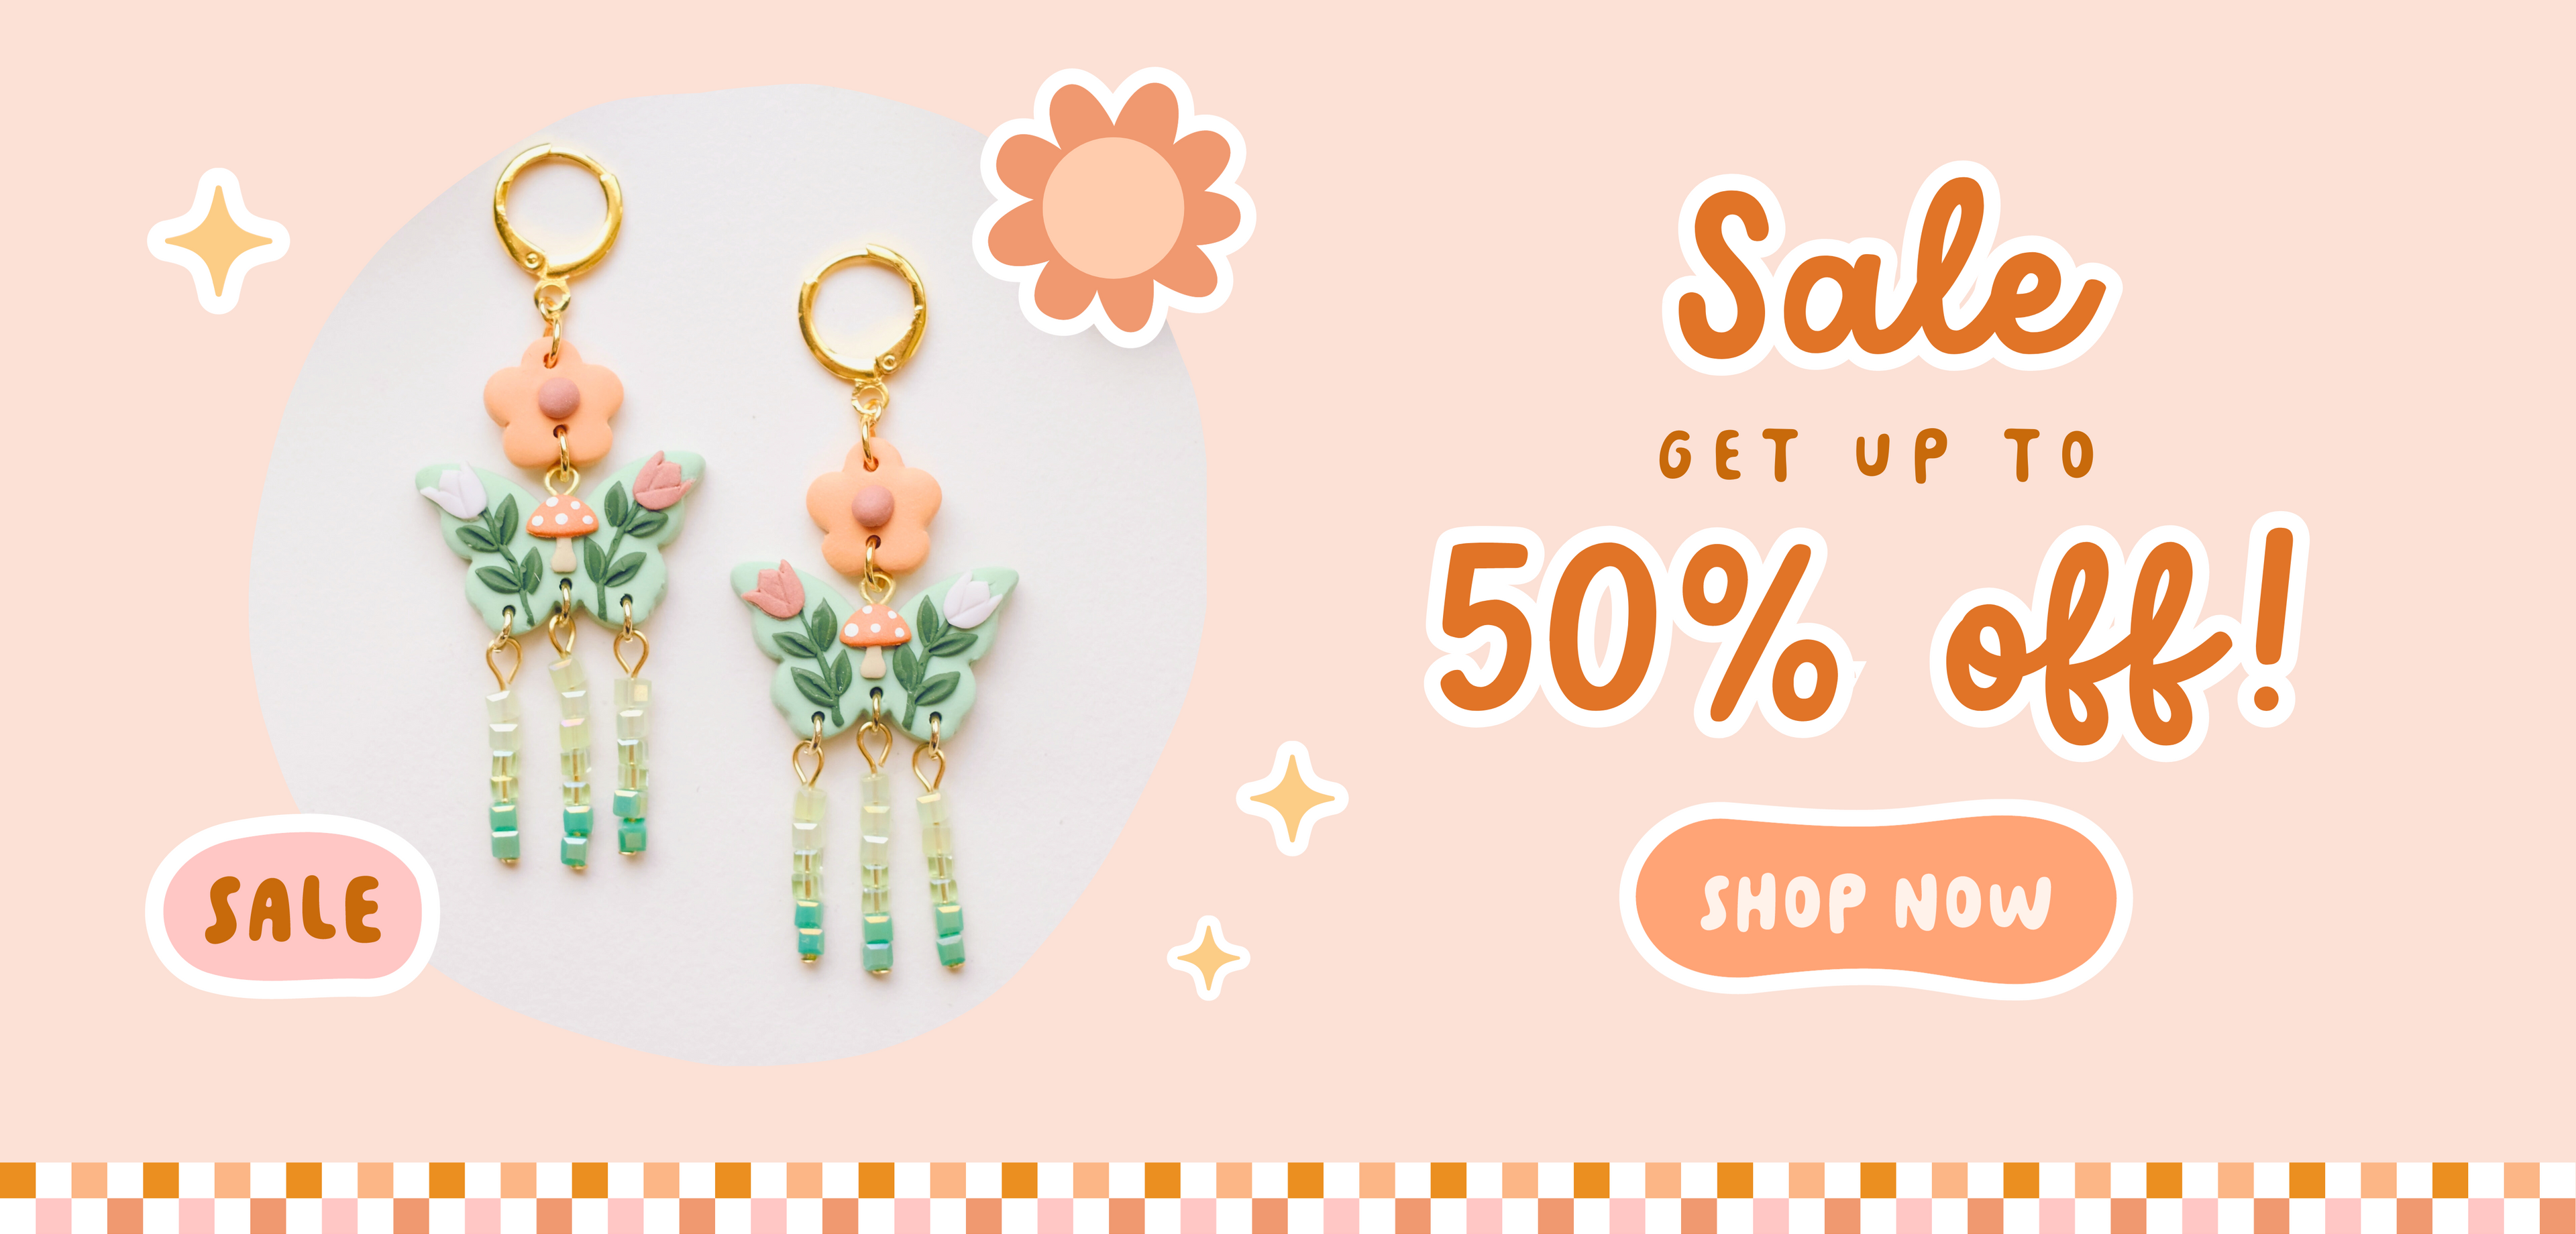 Get up to 50% off the sale items from my website, including earrings, accessories, stickers, and home goods!